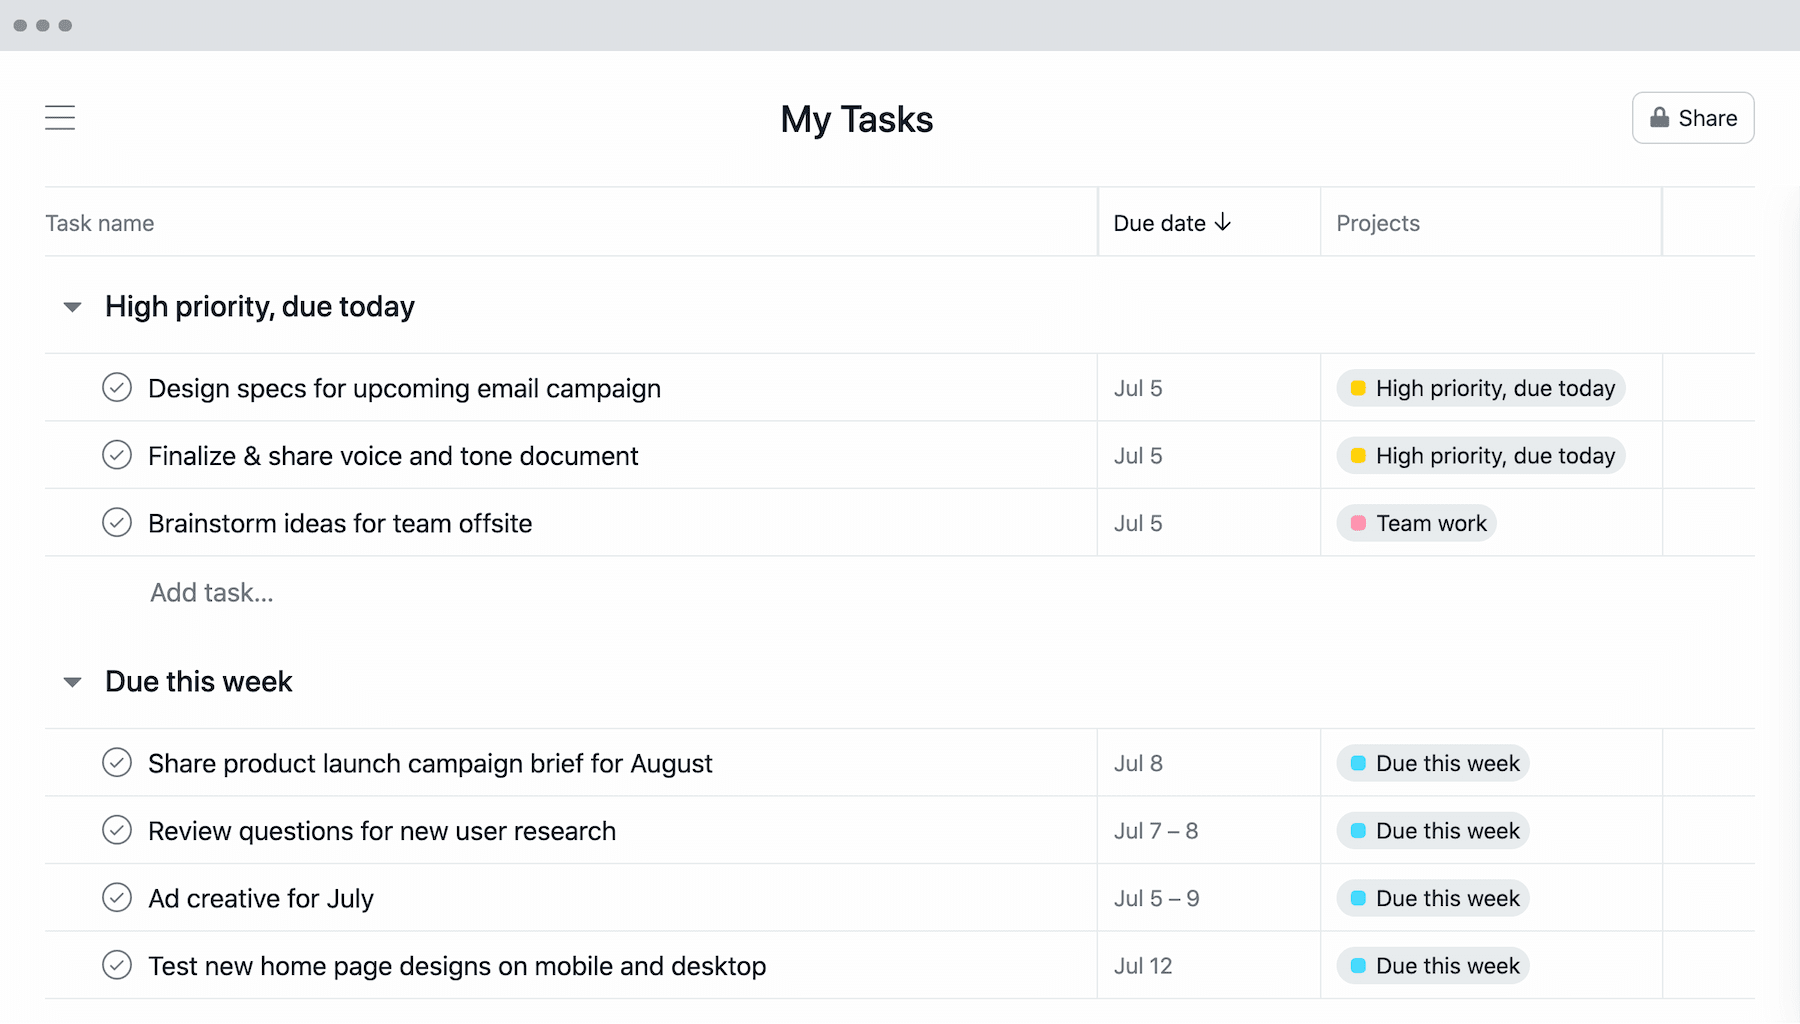 [Product UI] Organized GTD method in My Tasks project in Asana with priority, date, and project-level information (Lists)